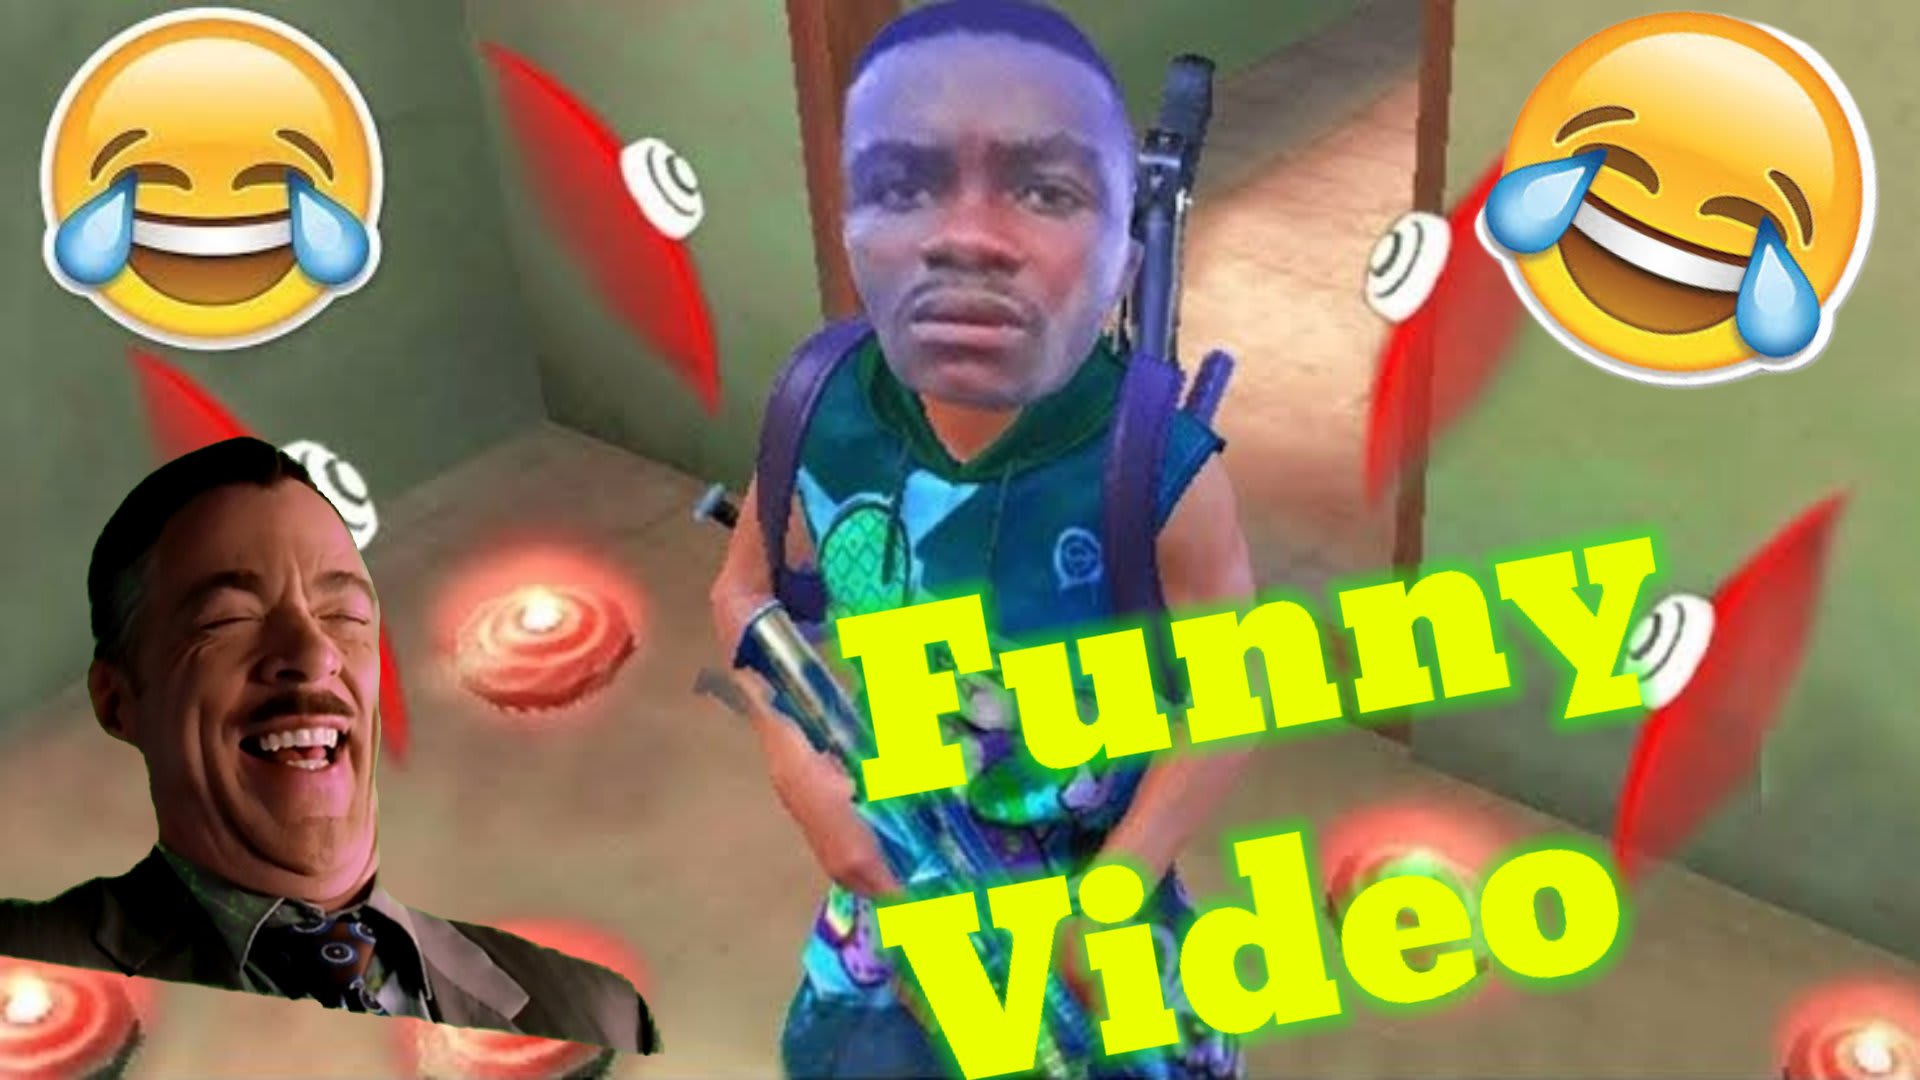 Do funny freefire video editing with funny memes by Dittojayaseela | Fiverr